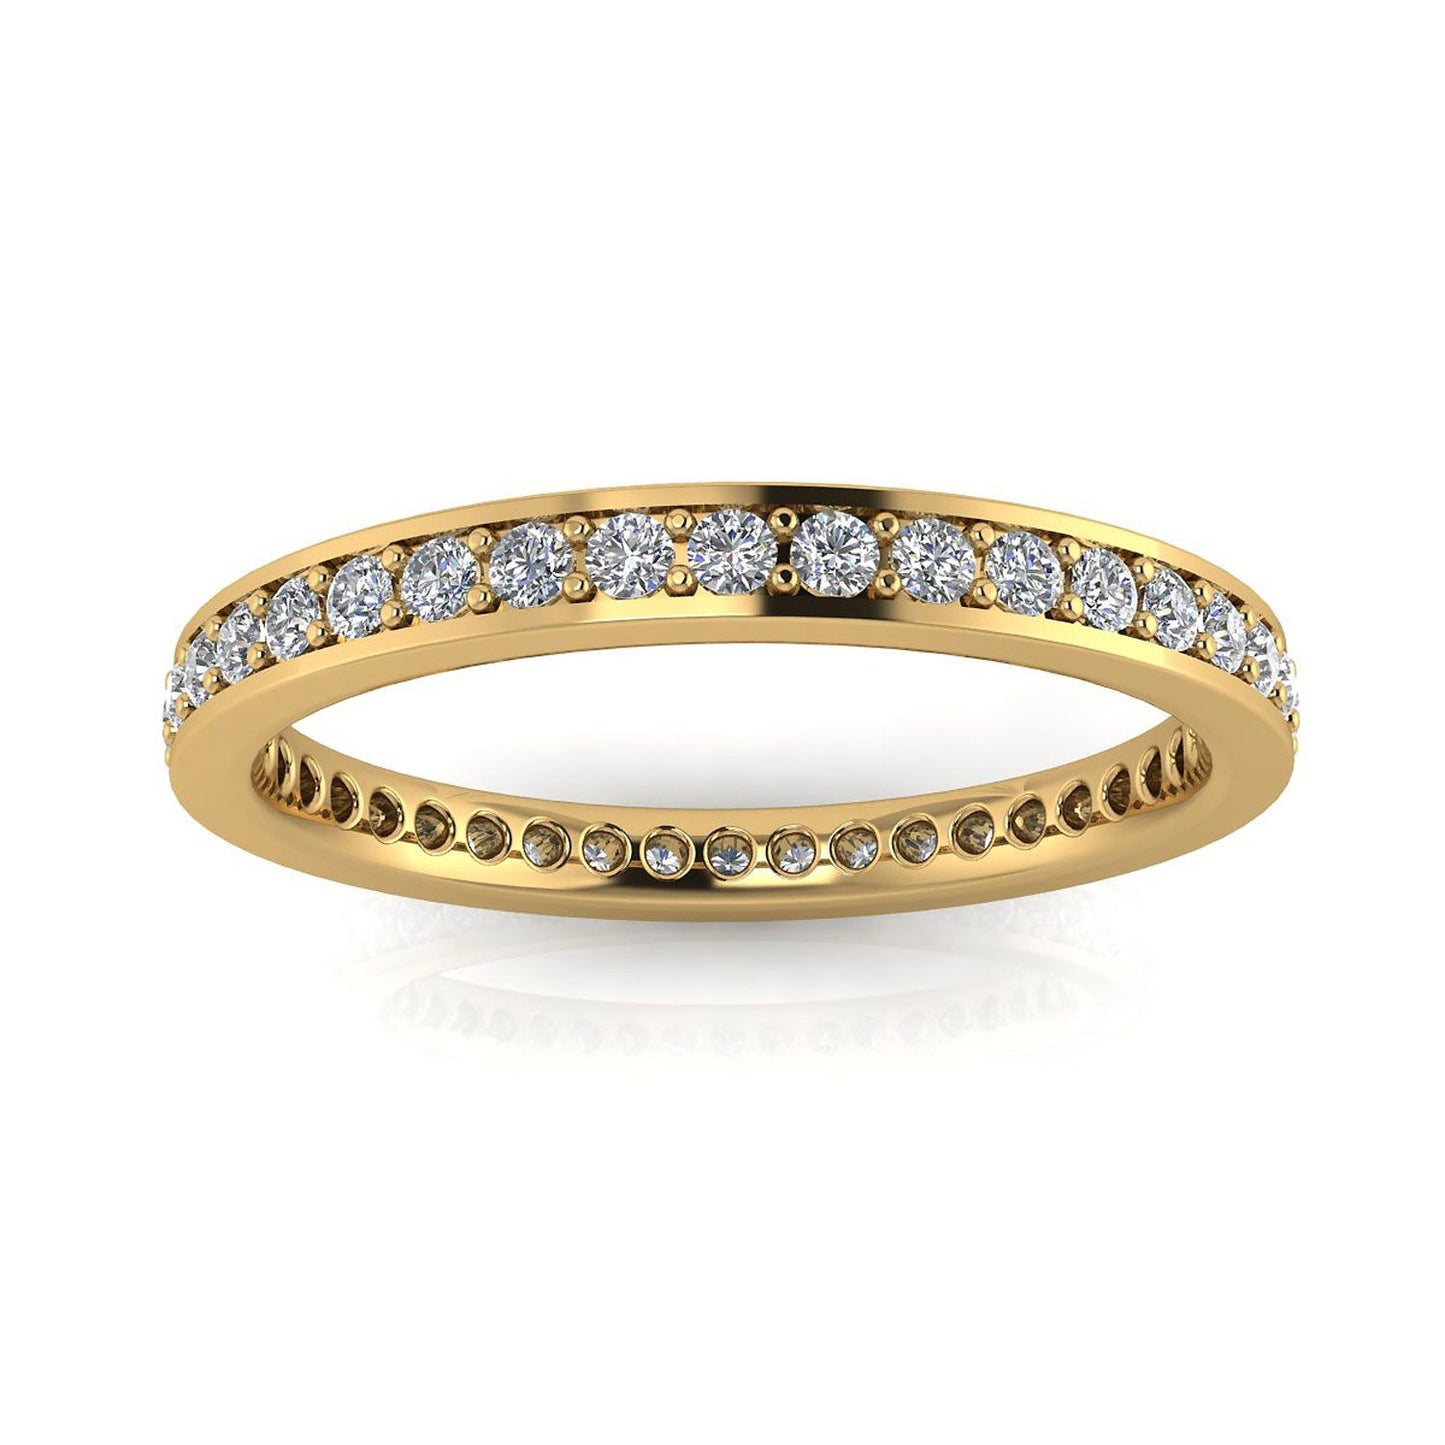 Round Brilliant Cut Diamond Channel Pave Set Eternity Ring In 18k Yellow Gold  (0.72ct. Tw.) Ring Size 7.5